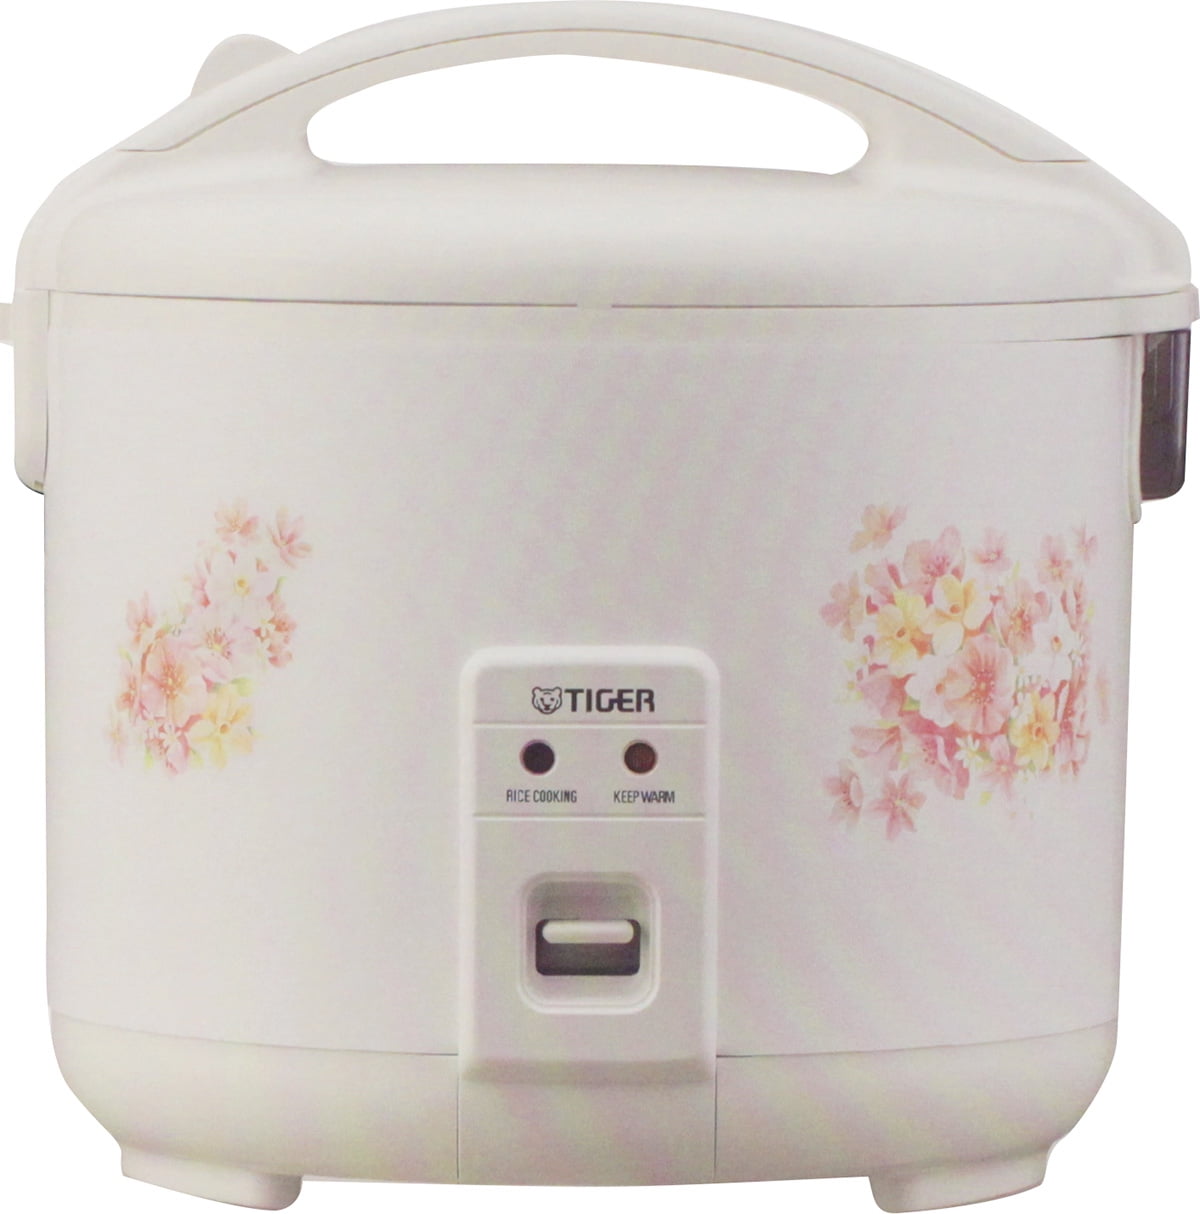 Tiger Jnp-0550 3-Cup (Uncooked) Rice Cooker and Warmer, Floral White